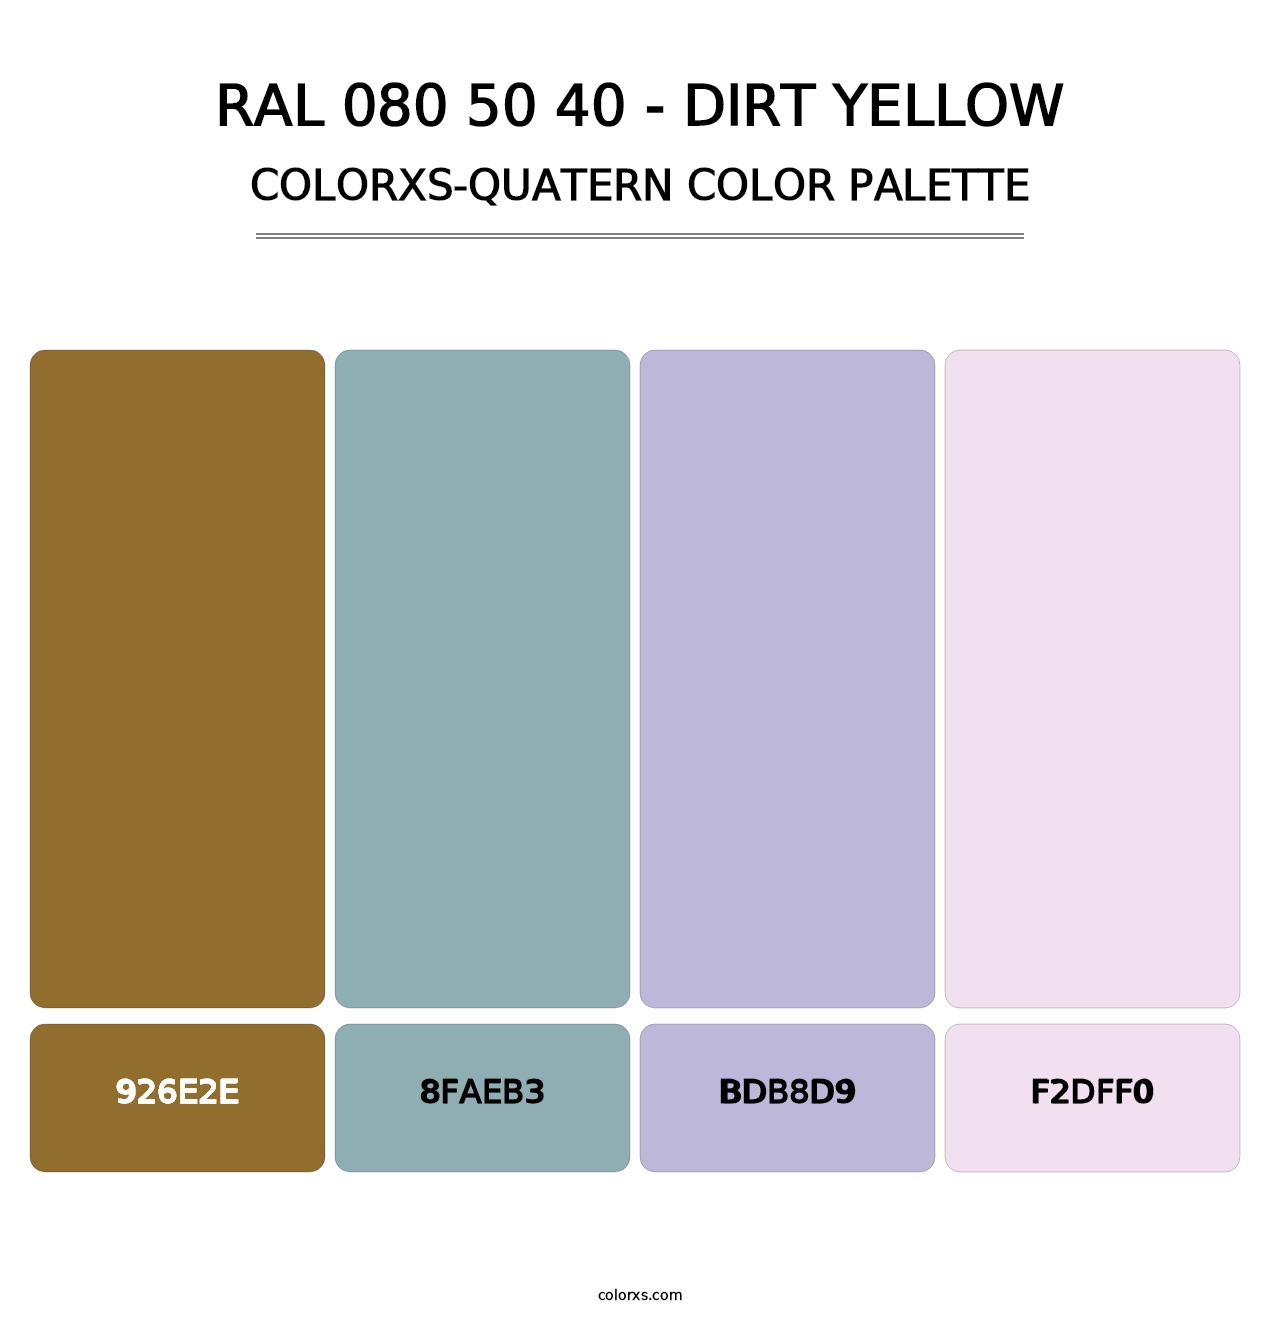 RAL 080 50 40 - Dirt Yellow - Colorxs Quatern Palette